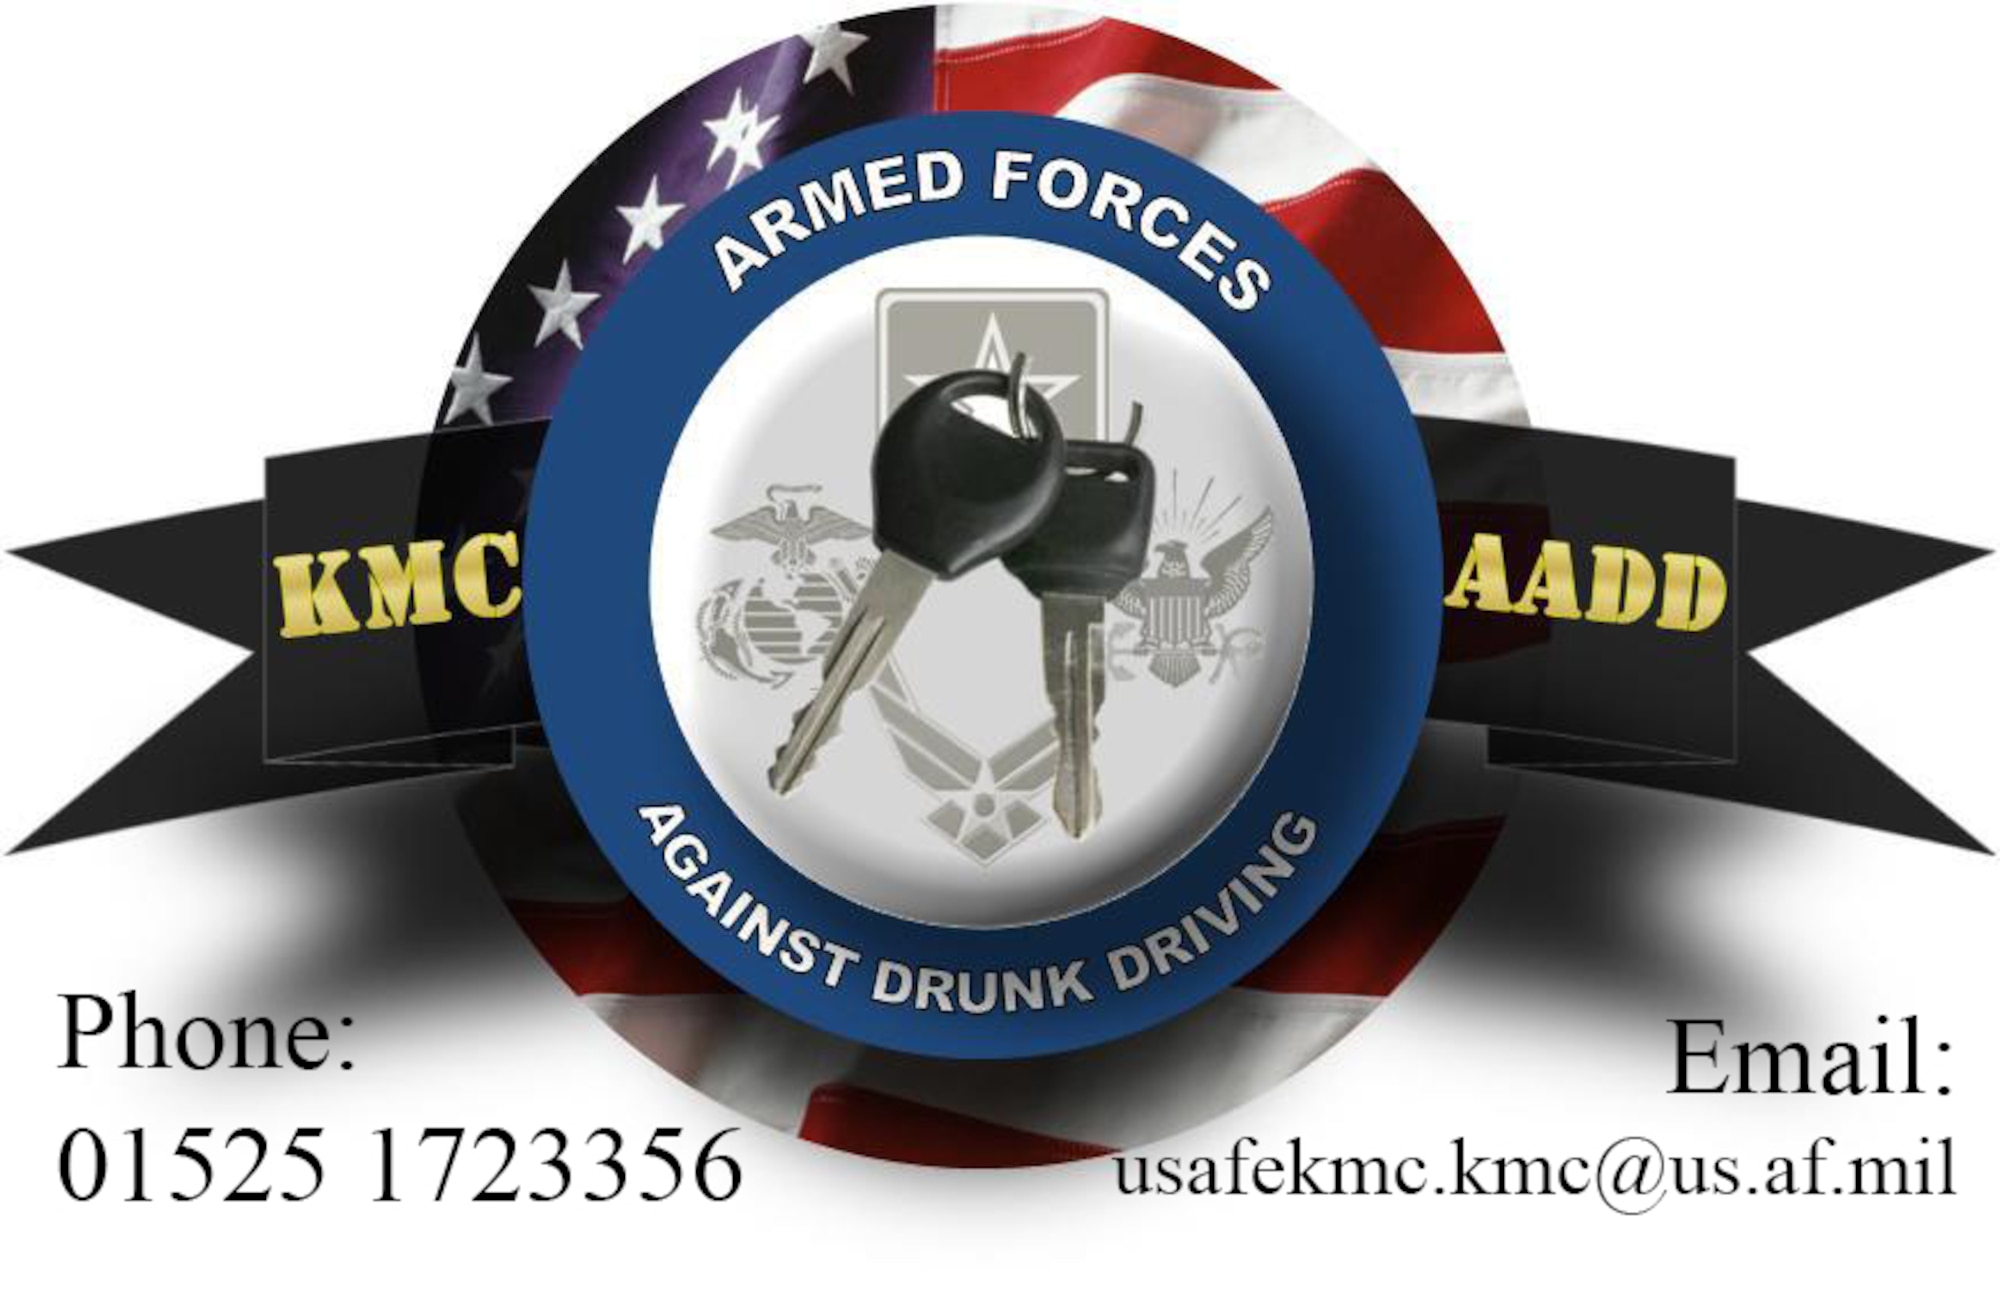 The hours for Armed Forces Against Drunk Driving extended 1 July in an effort to reduce the number of DUIs in the Kaiserslautern Military Community. While everyone is encouraged to have a plan if they drink, there really is no reason anyone under the influence should get behind the wheel. AADD can pick you up if your plans fall through on Fridays and Saturdays from 10 p.m. to 6 a.m.